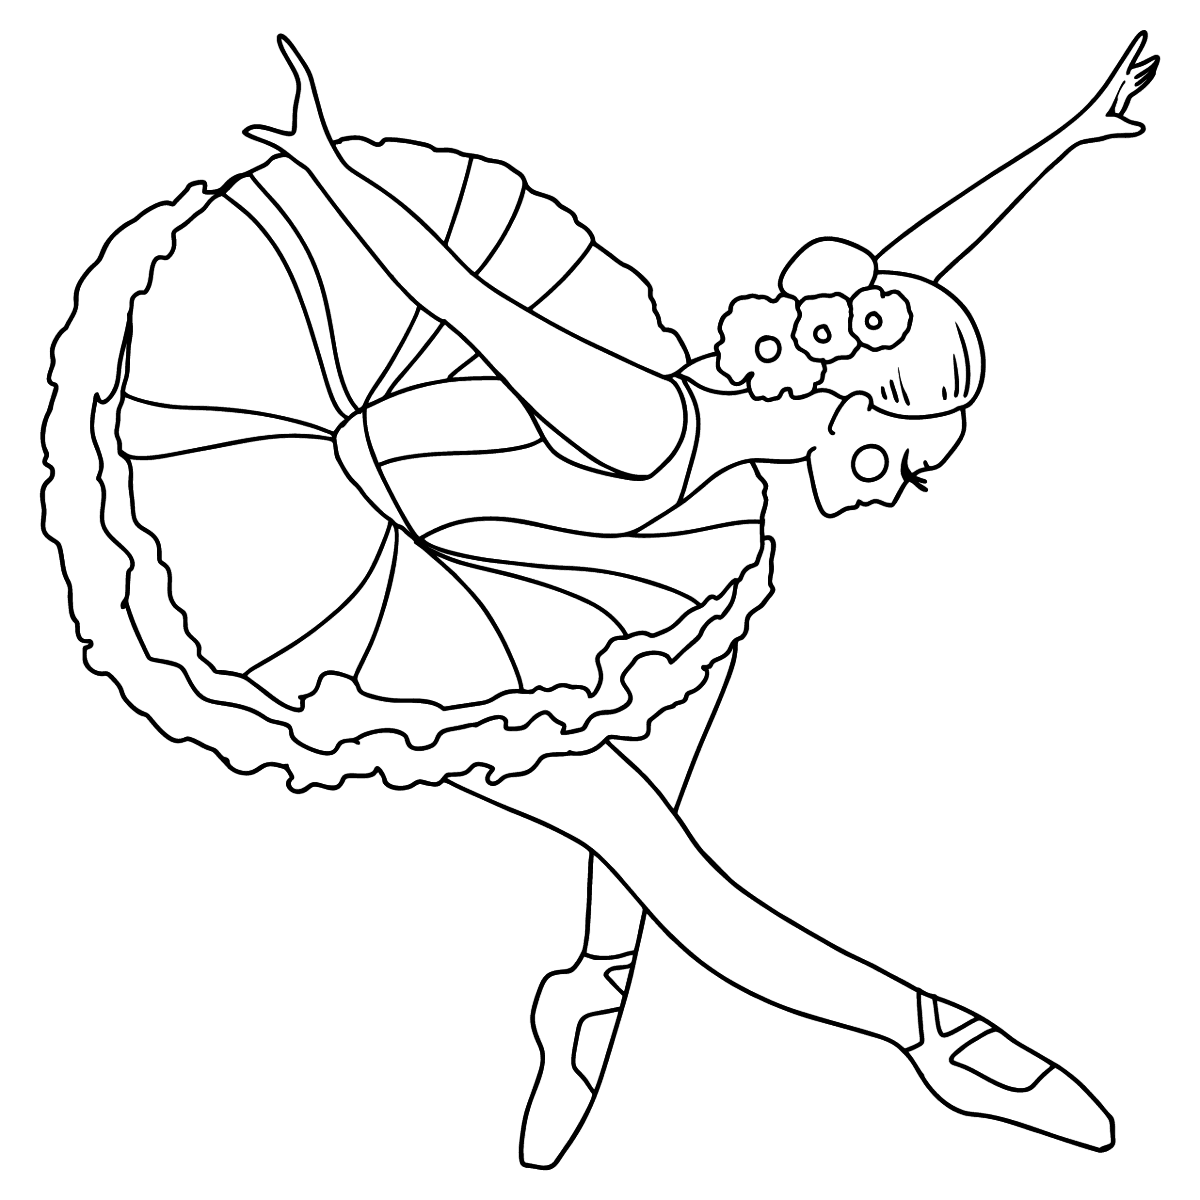 Ballerina coloring pages for Kids   Print for Free, and Color Online